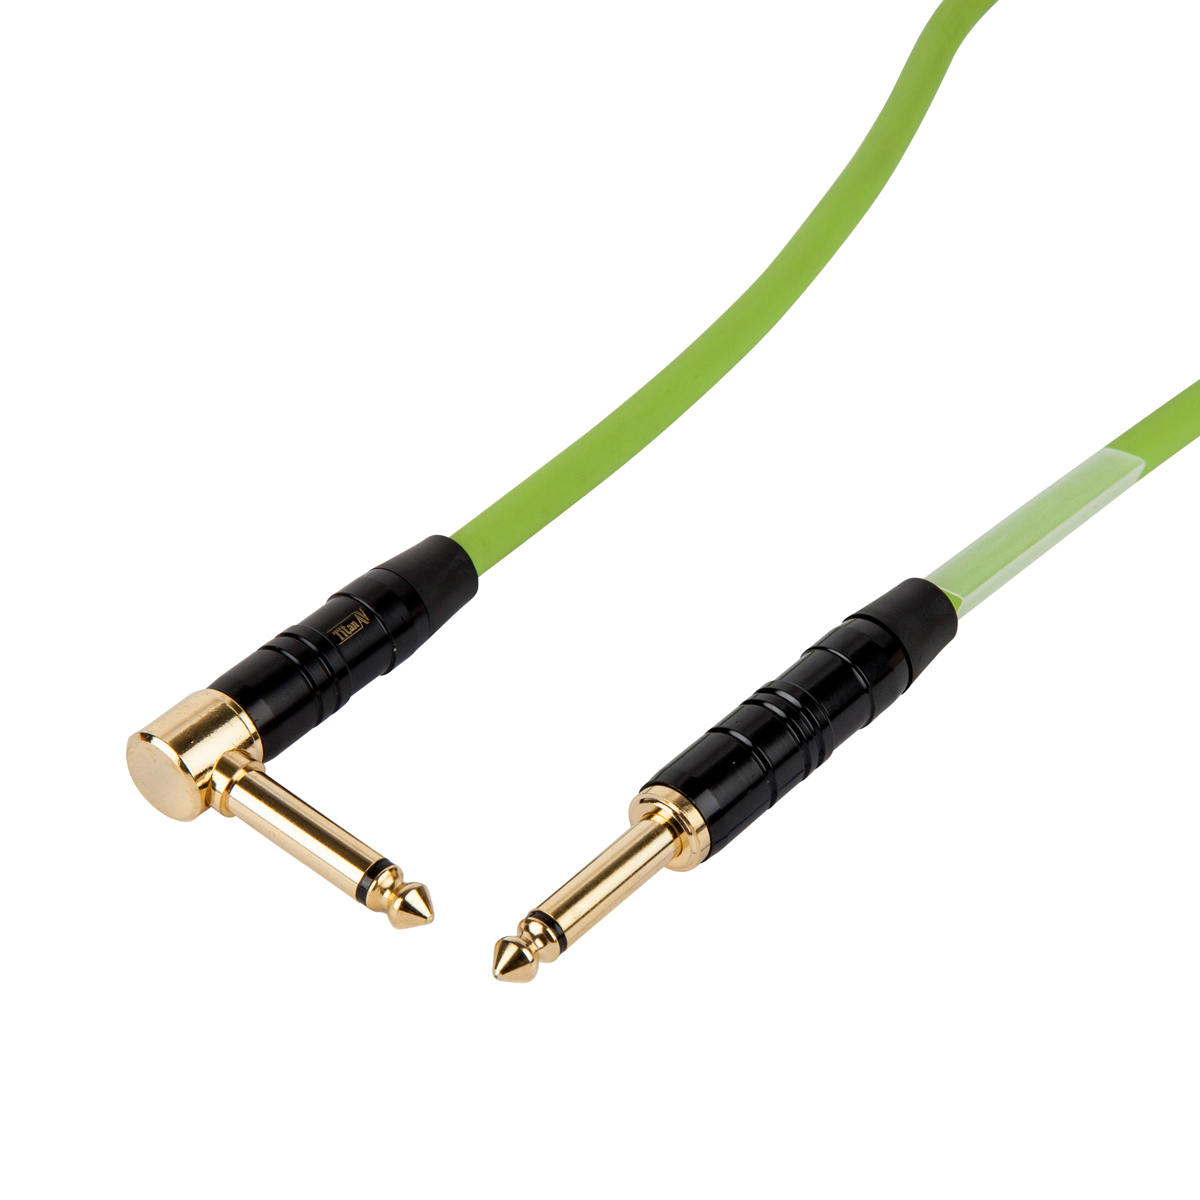 0.5m Guitar Patch lead 1/4" Jack to 1/4" Right Angle Jack, 6.5mm Green PVC Jacket